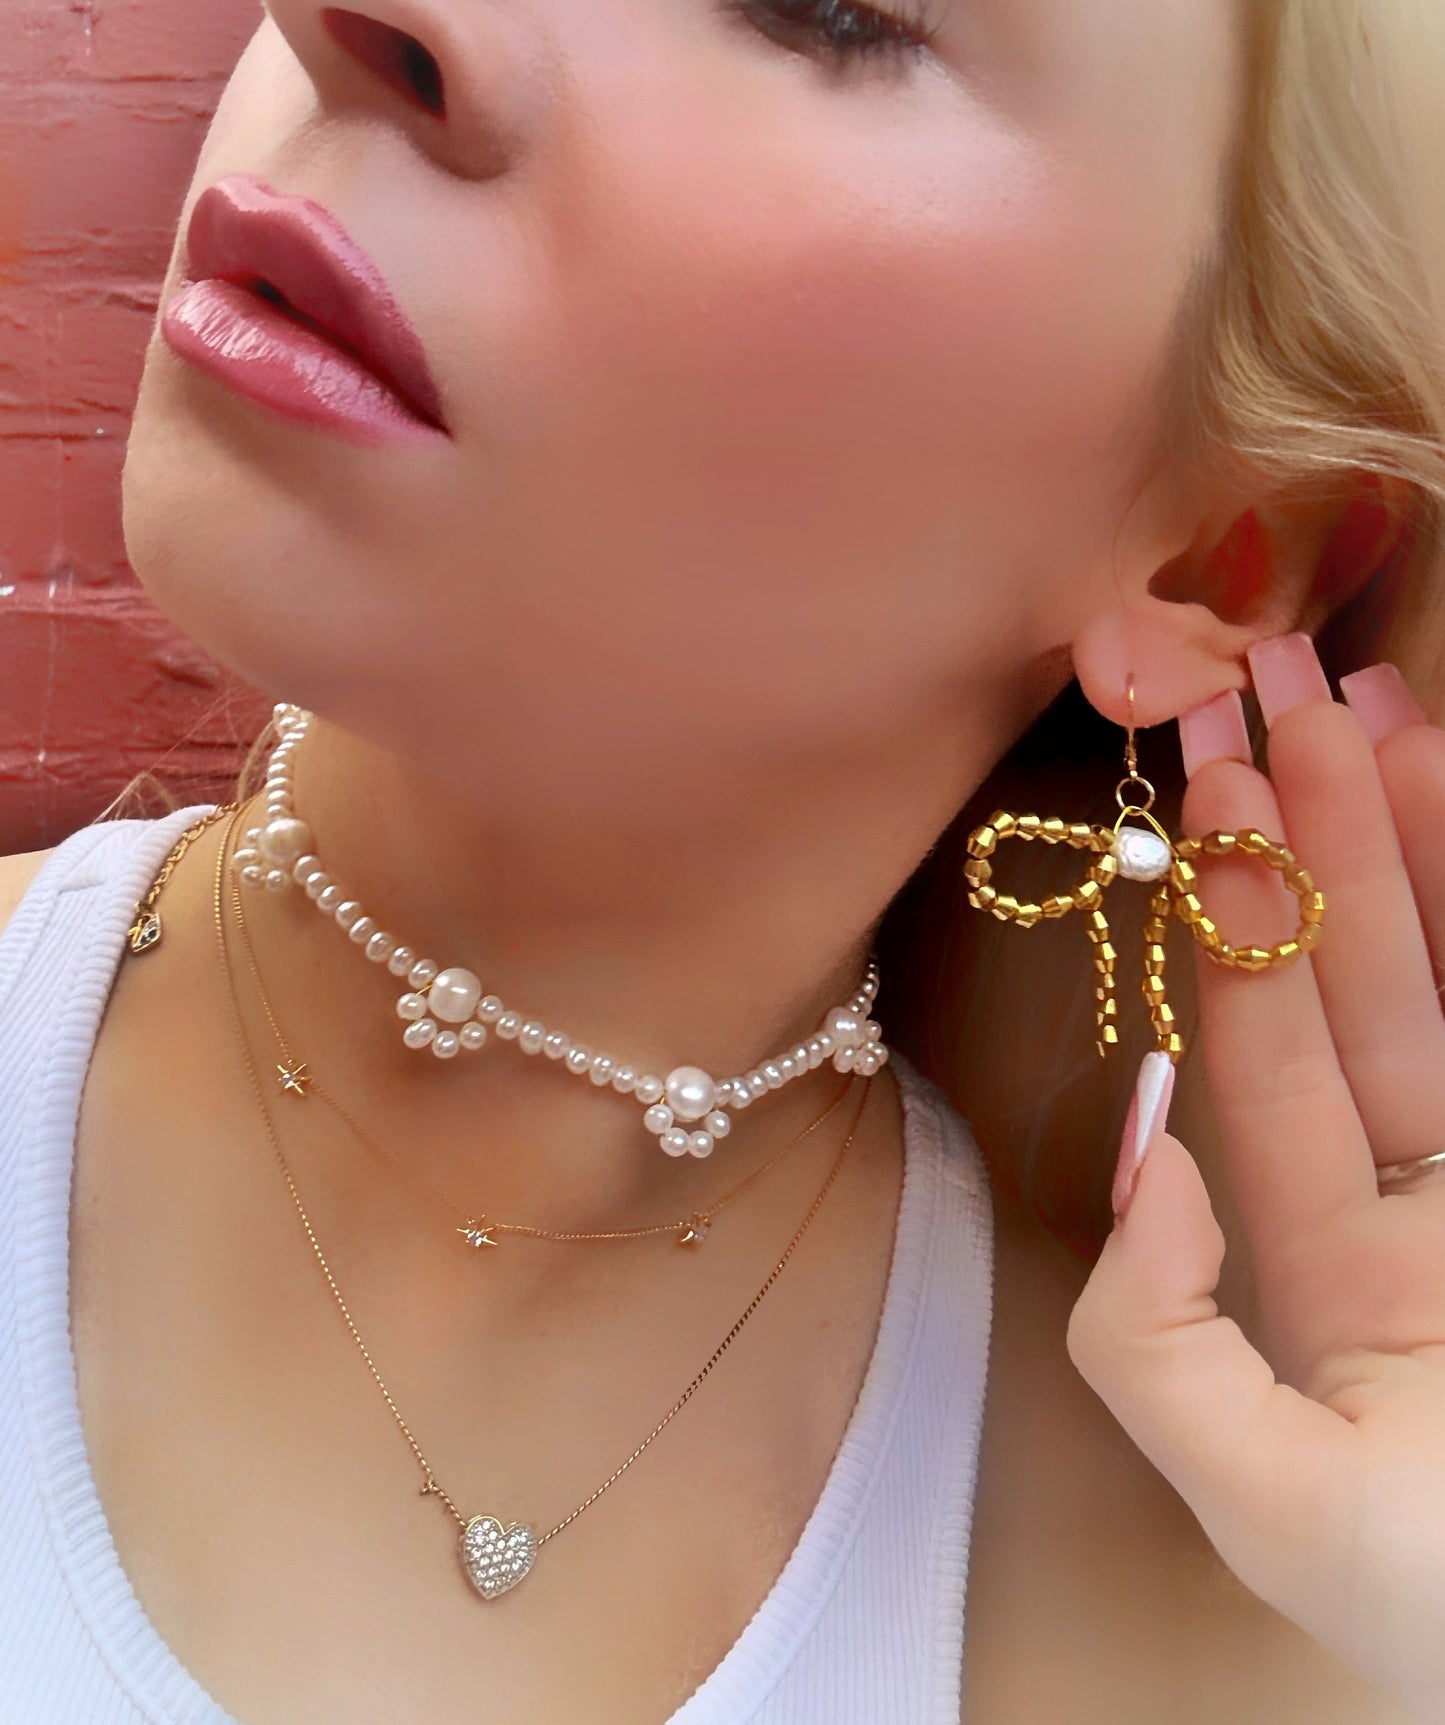 Statement bow earrings, coquette aesthetic jewelry, dangle bow earrings with gold metal beads and white freshwater pearls, cute girl jewelry